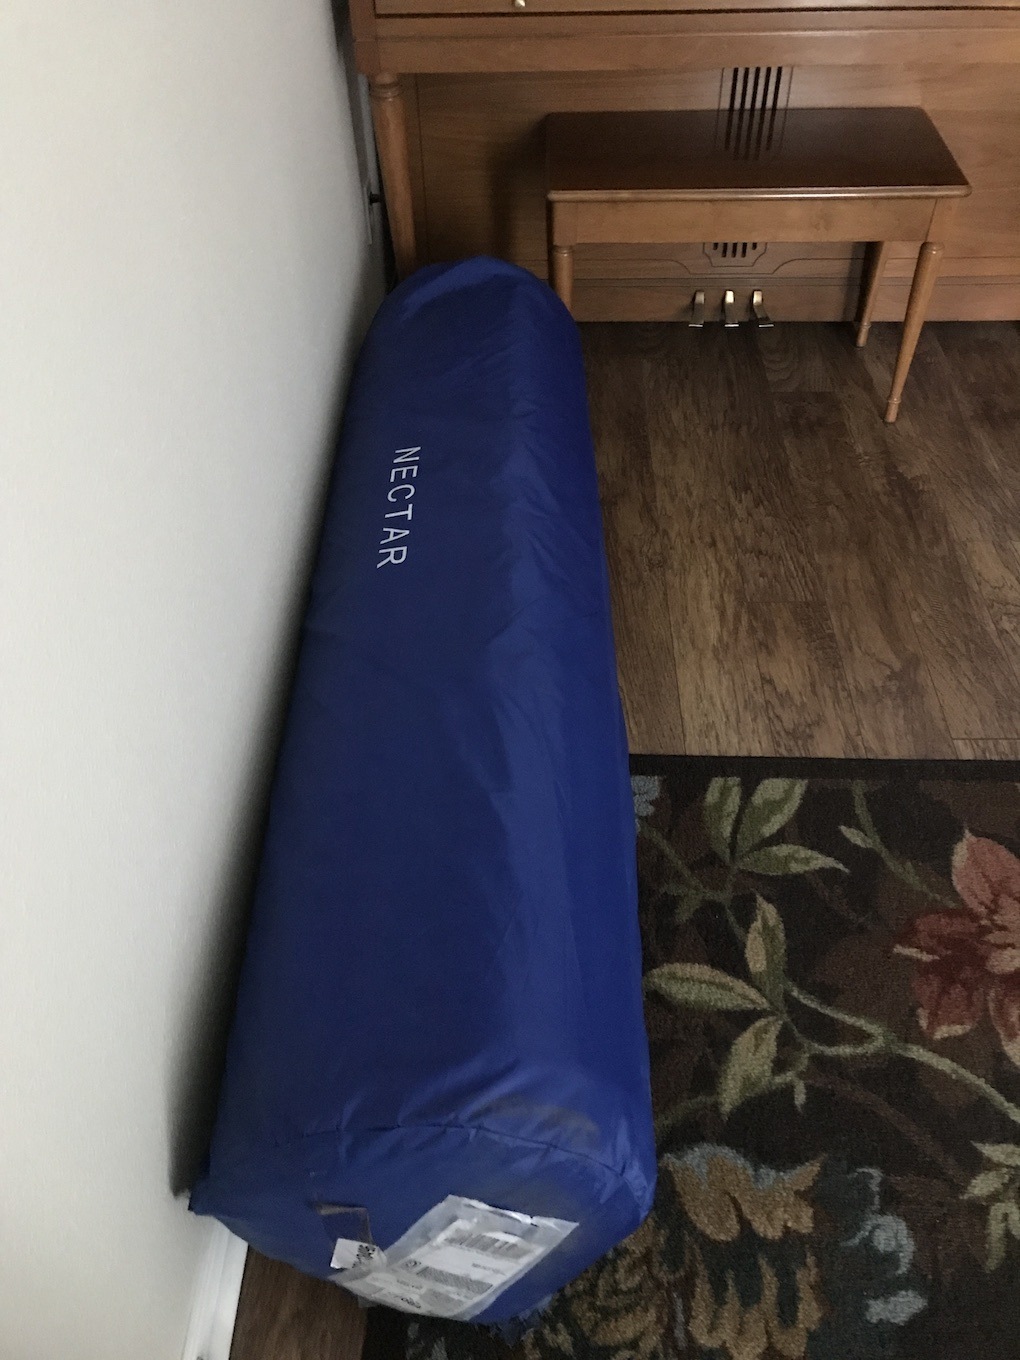 Queen Sized Nectar Mattress Review - Tiny House Blog